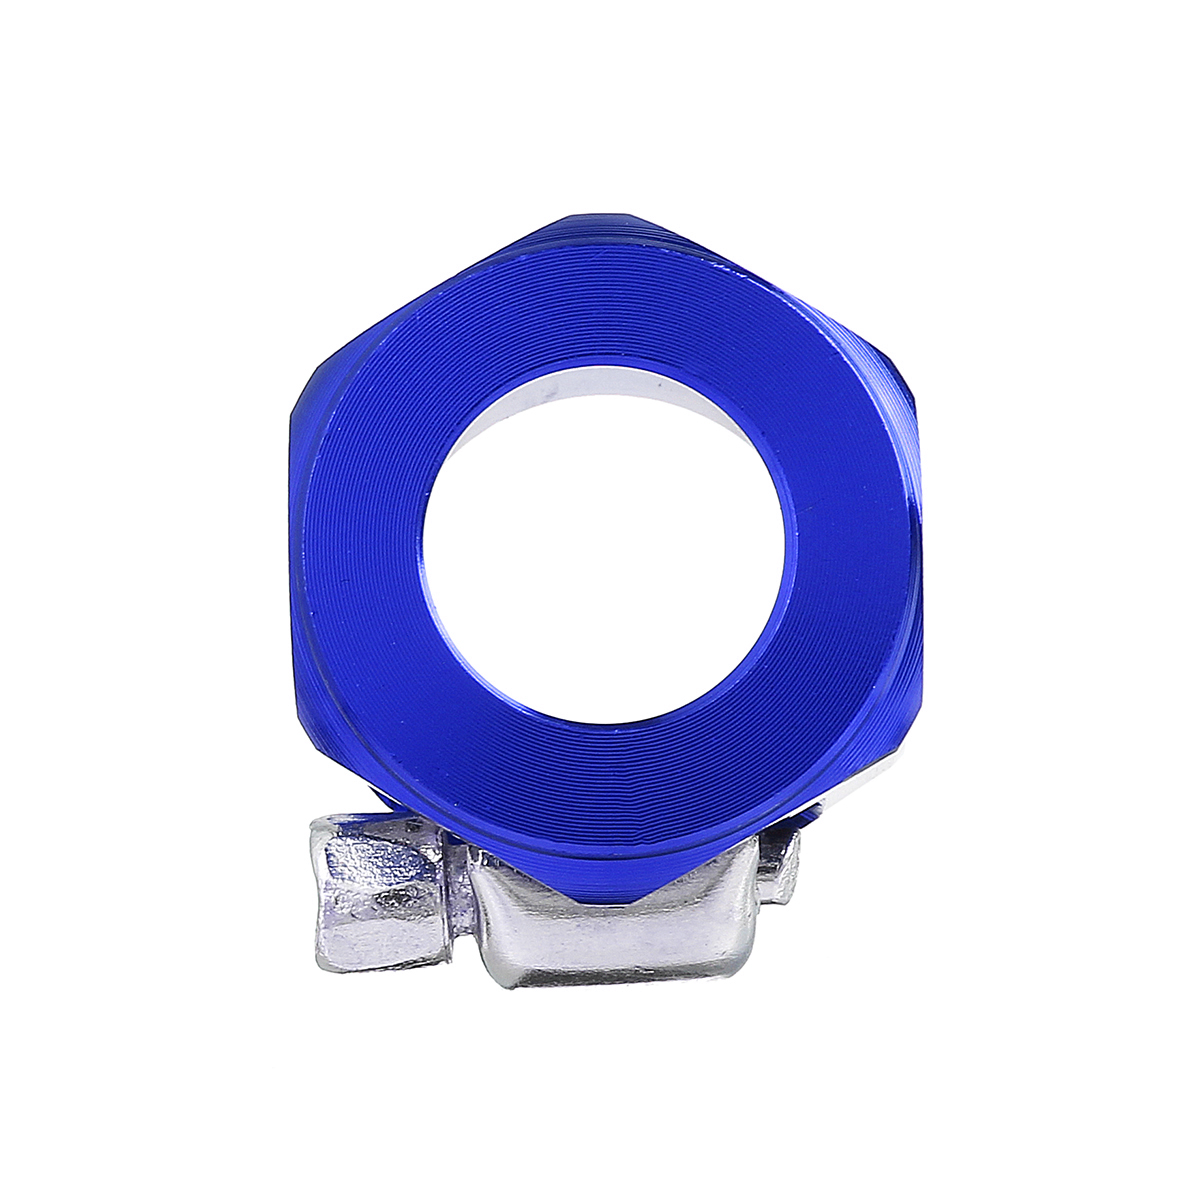 AN8 Hex Hose Finisher Clamp with Screw Band Hose End Cover Fitting Adapter Connector - Auto GoShop